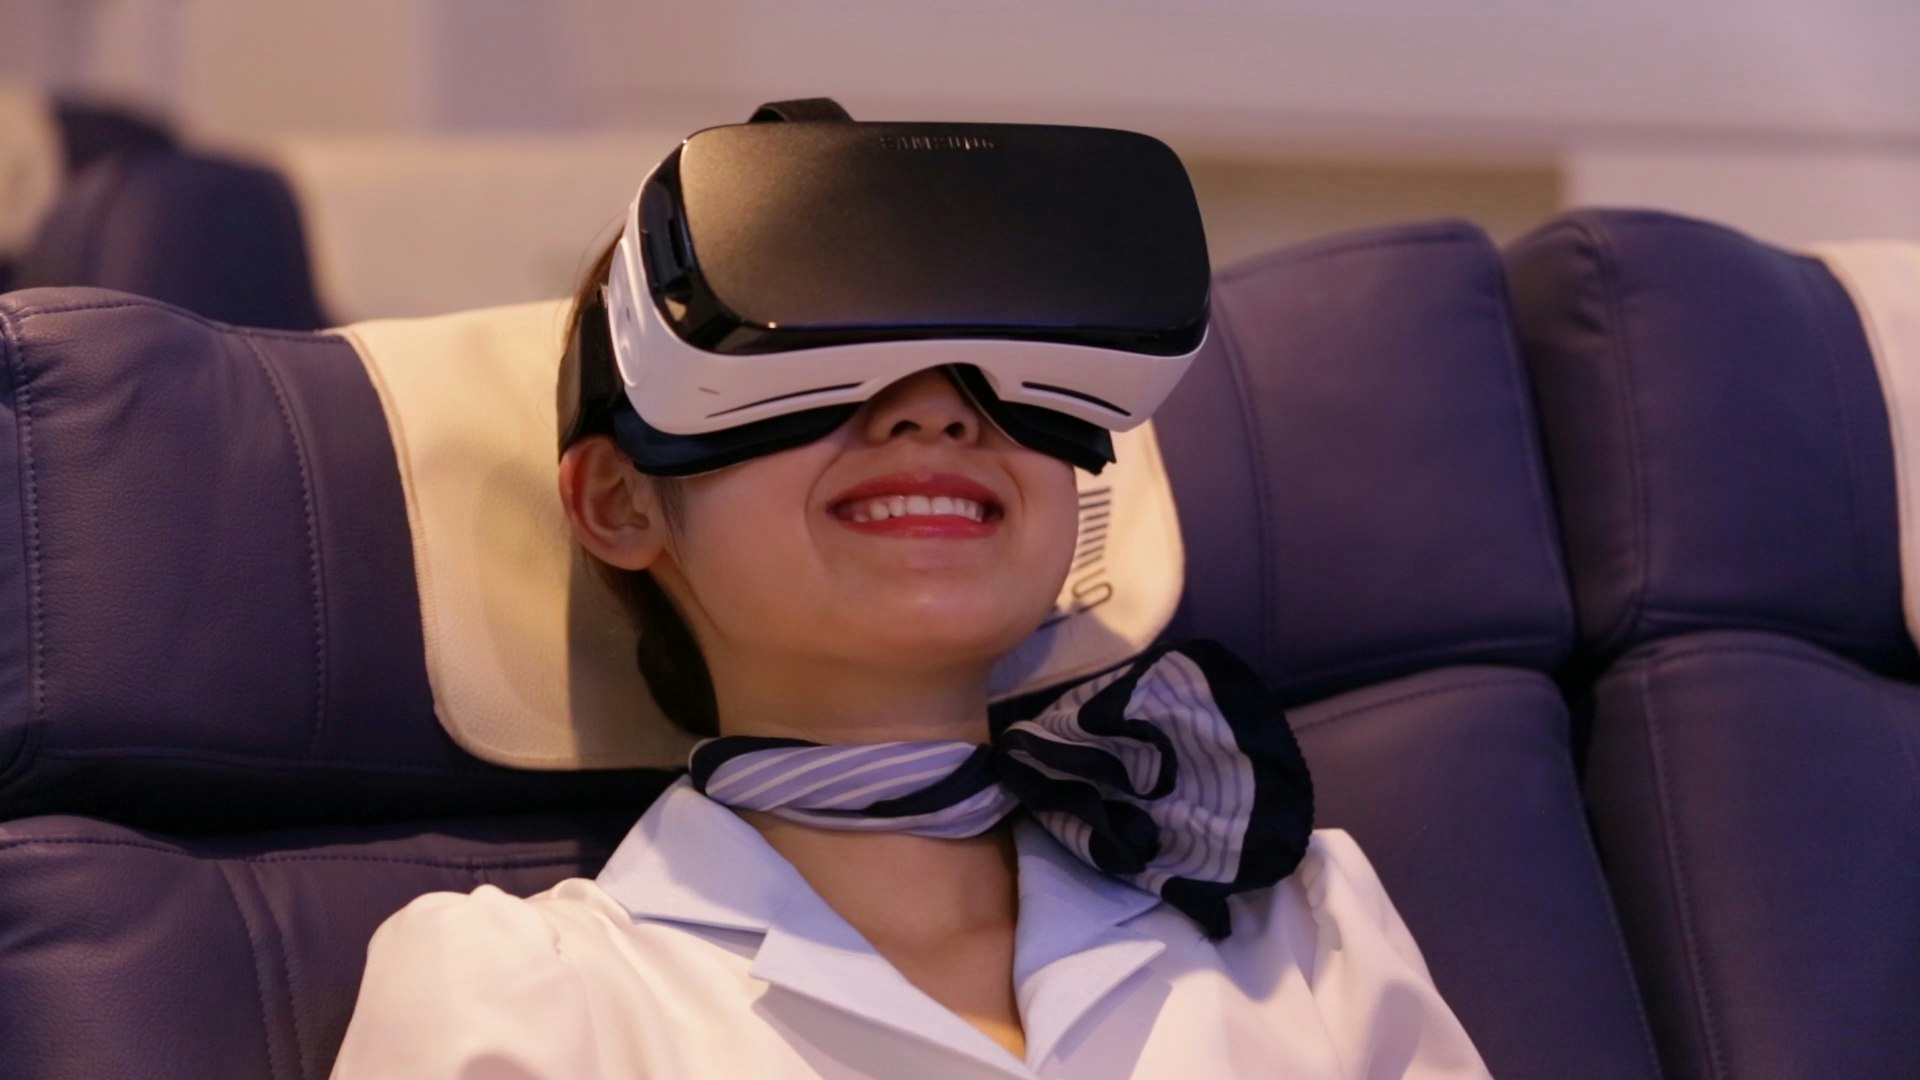 Guests wear virtual reality headsets to experience the flight, before exploring their destination.